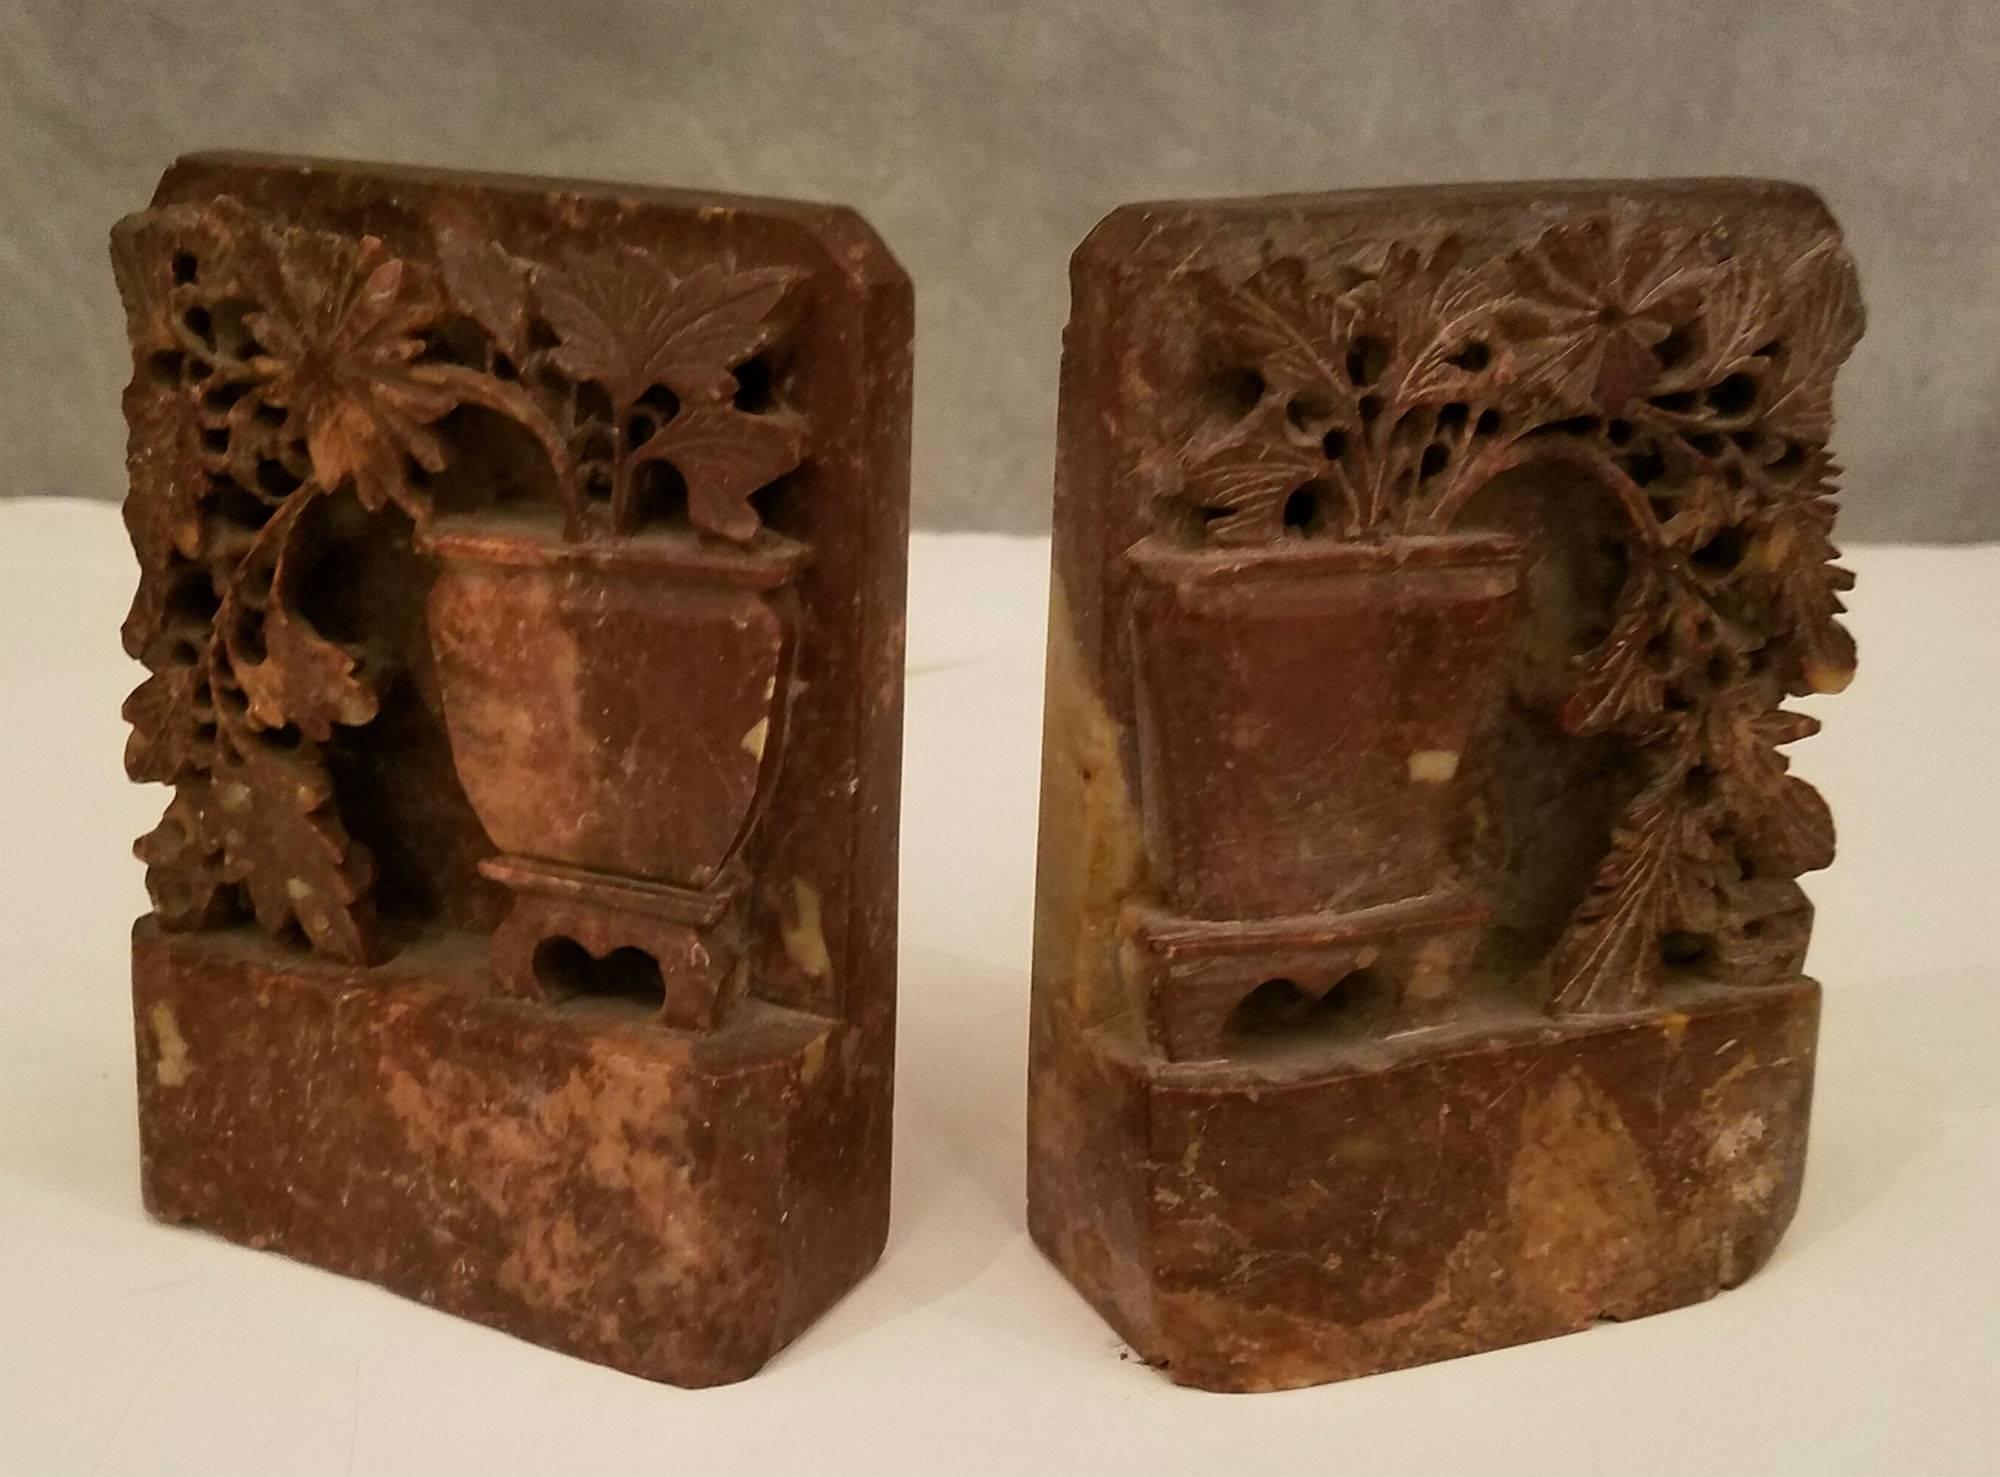 Collection of Chinese carved soapstone pieces, comprised of:

Pair of bookends (H: 5.25